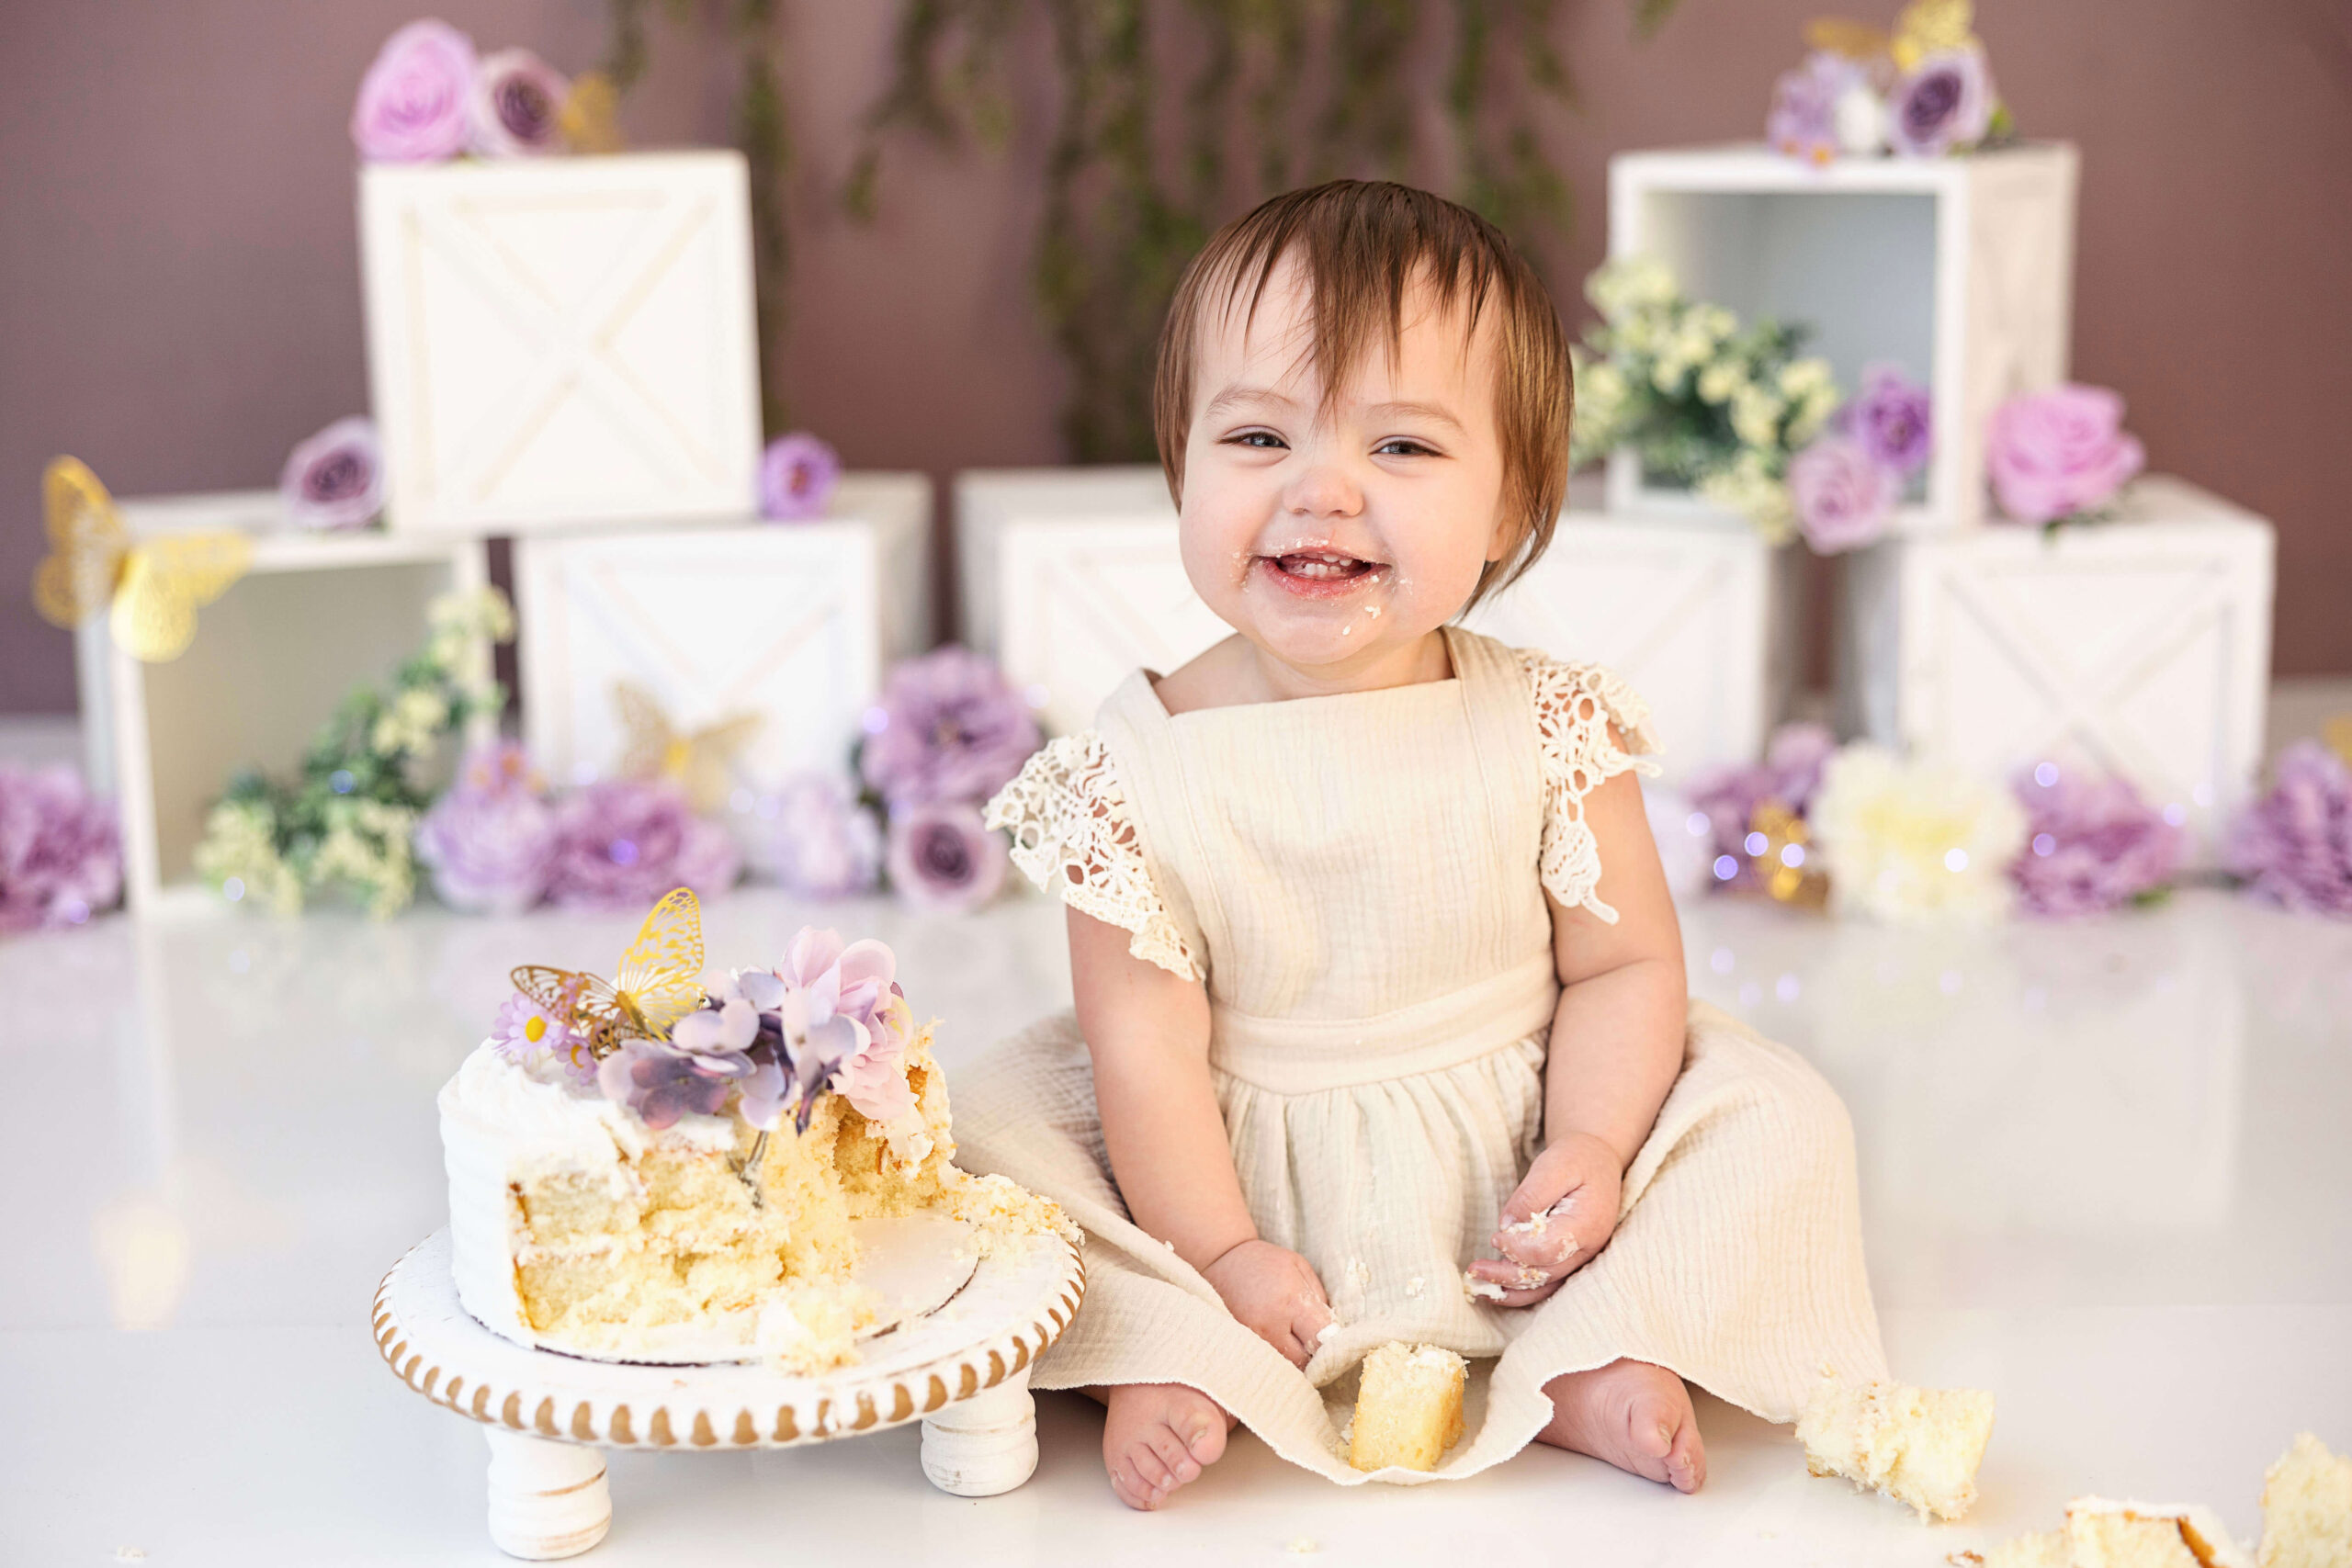 Birthday White Cake With Sweets And Candle For Little Baby Boy And  Decorations For Cake Smash Stock Photo, Picture and Royalty Free Image.  Image 114288986.